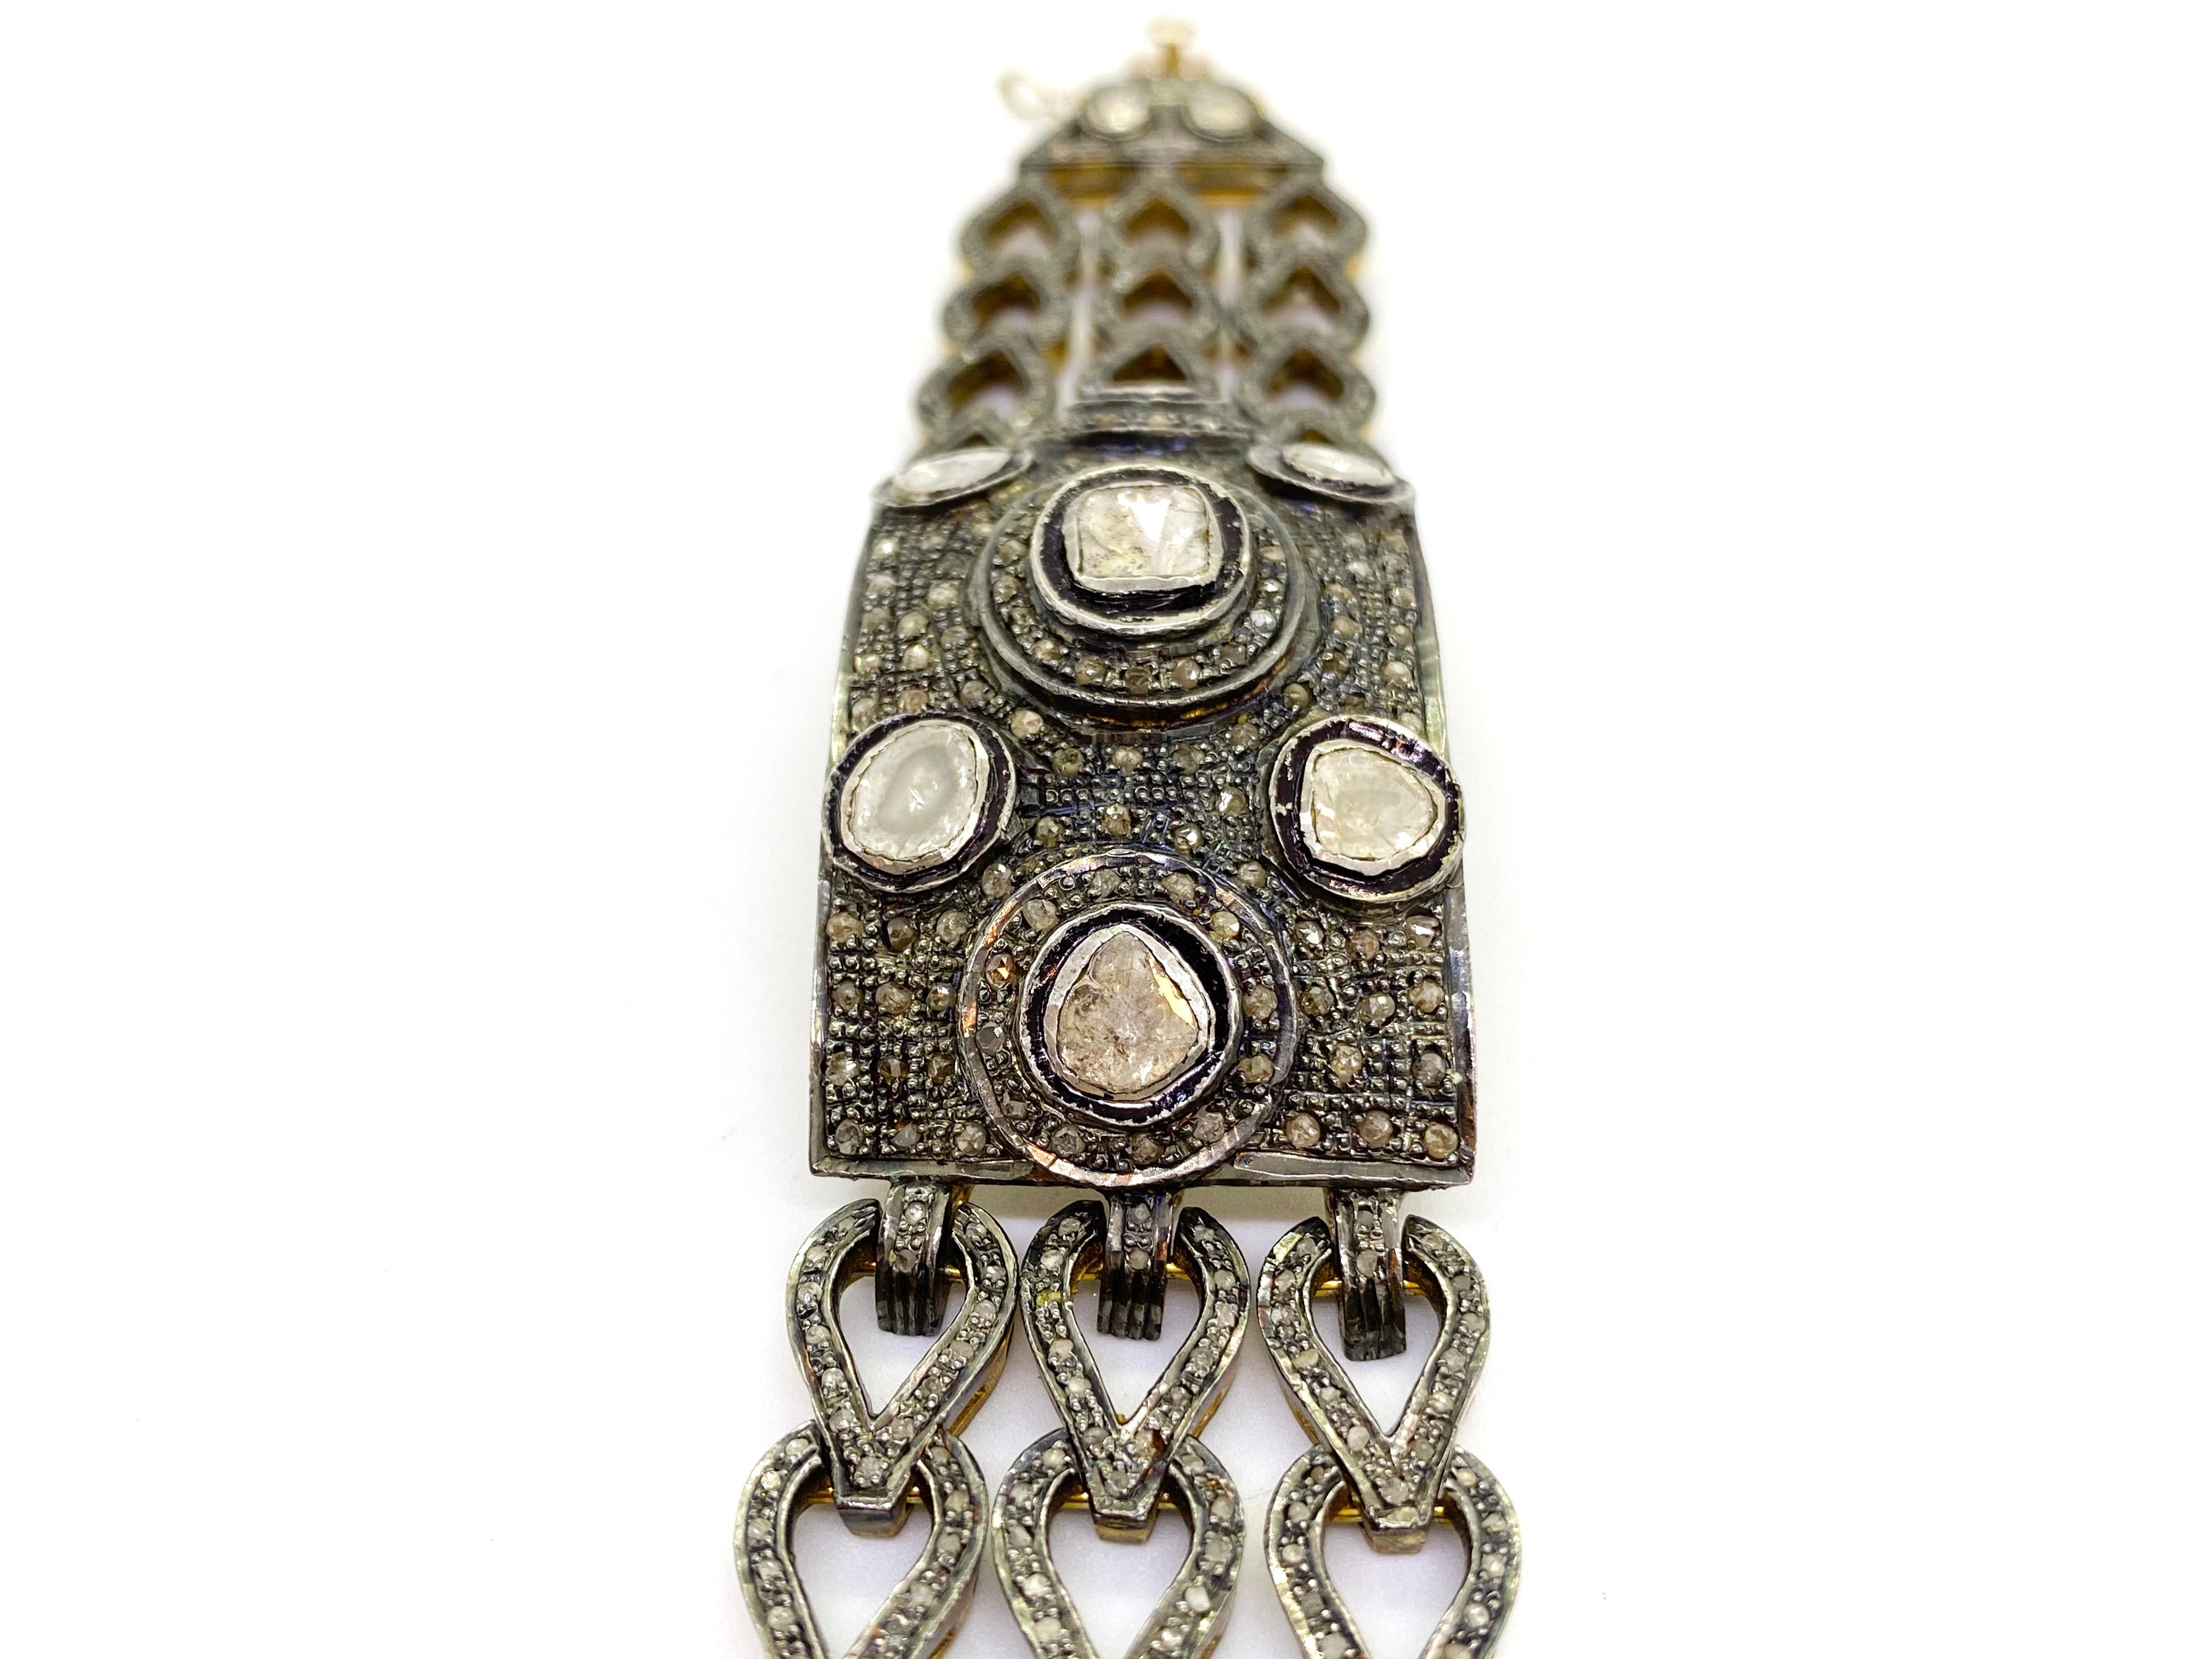 Indian Diamond Bracelet.
History of this jewelry, Purchased sometime in the early 2000s from India Goa by a Pakistani Gemstone Merchant.
Jewelry Silver and Gold Plated?
I don’t know about Indian jewelry, whether those diamonds are called Polki